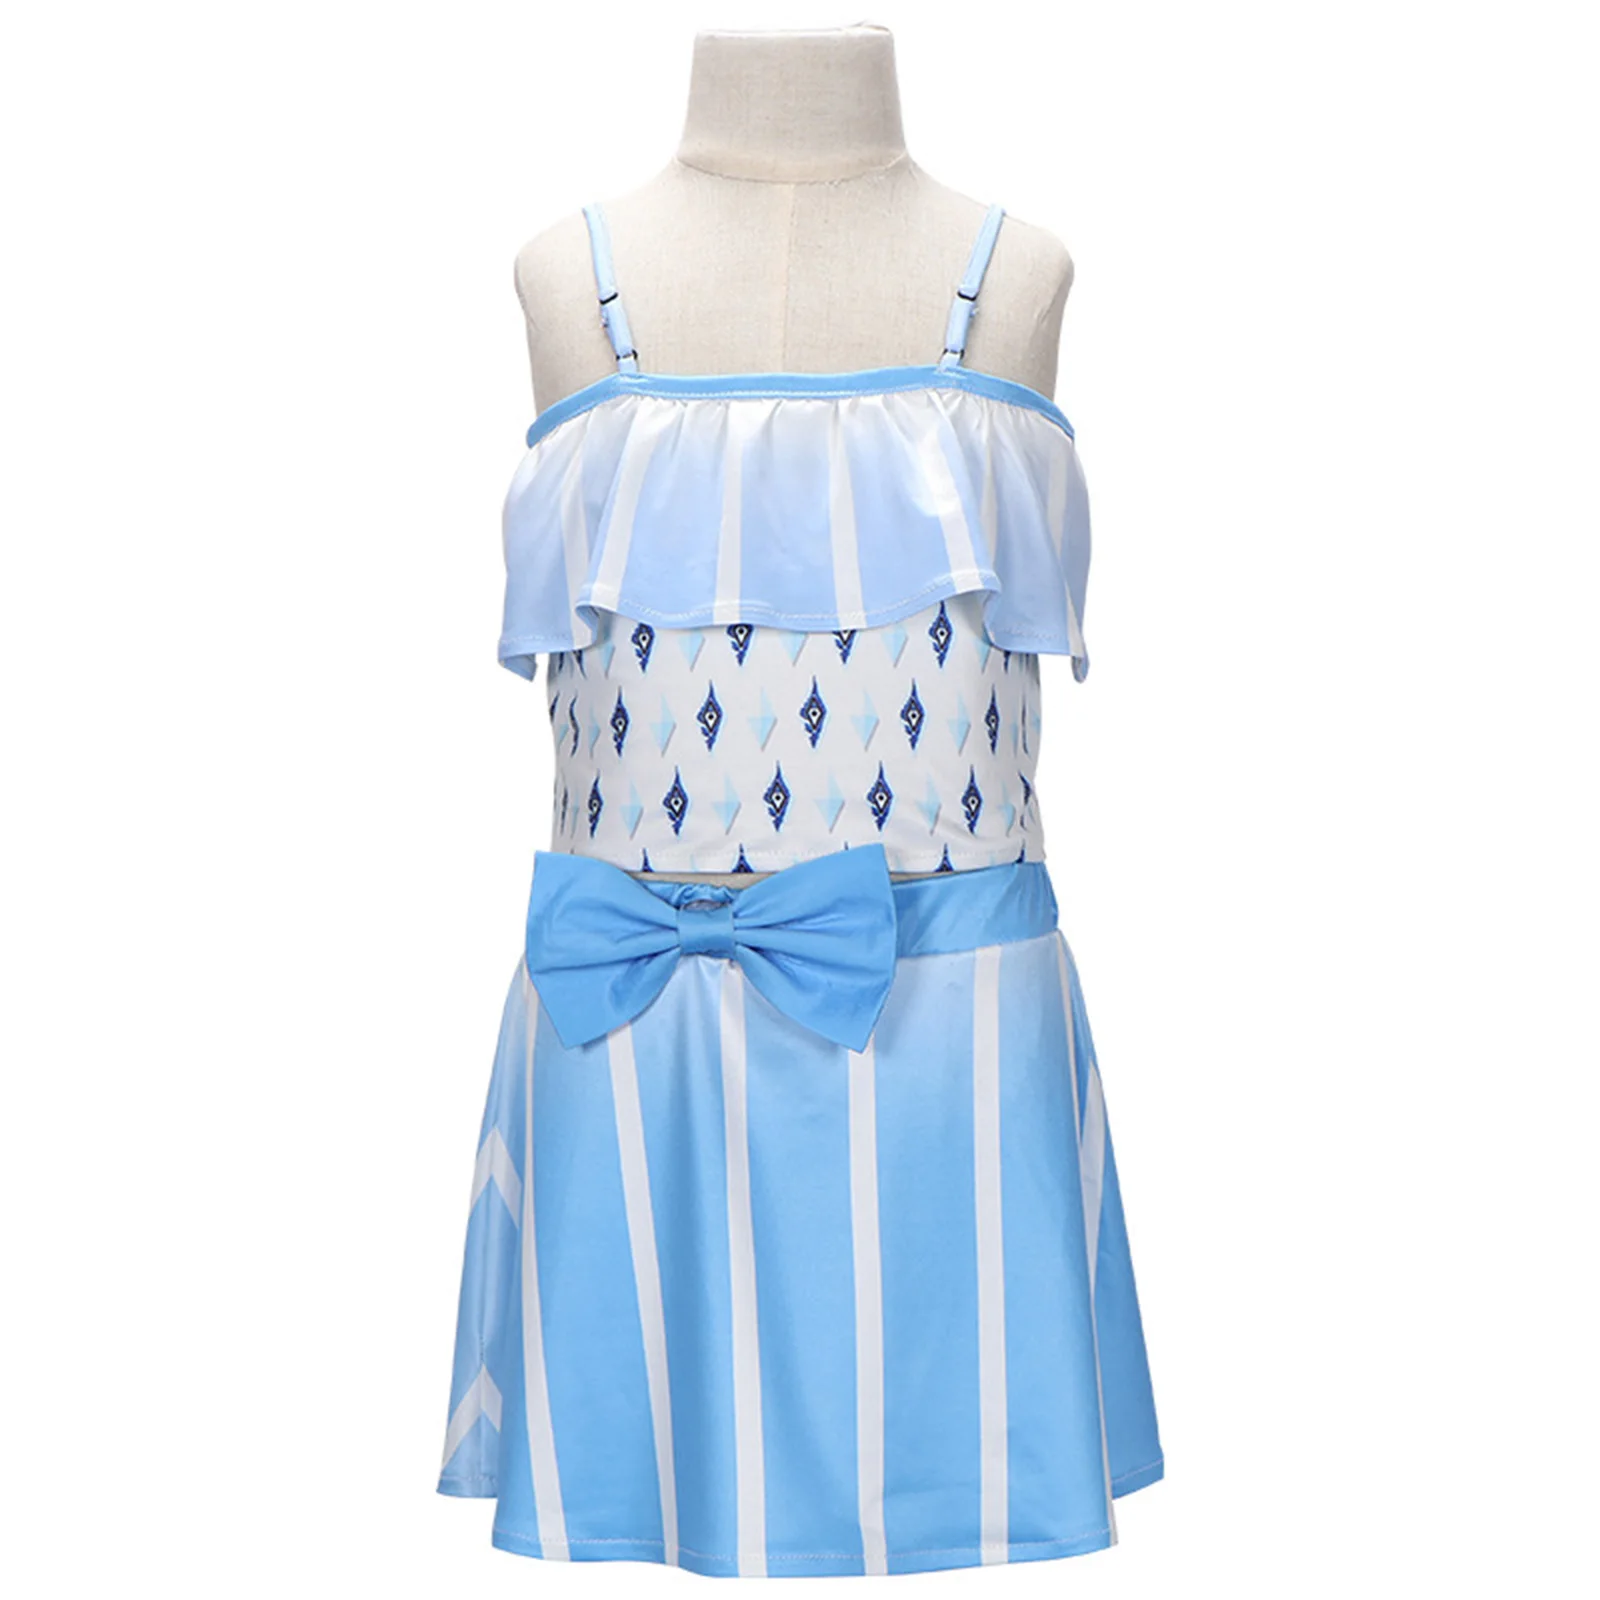 Anime Elsa Swimming Suit Summer Strap Set Cosplay Costume for Girl With Cap Sexy spaghetti strap Ruffles Beach Dress Halloween